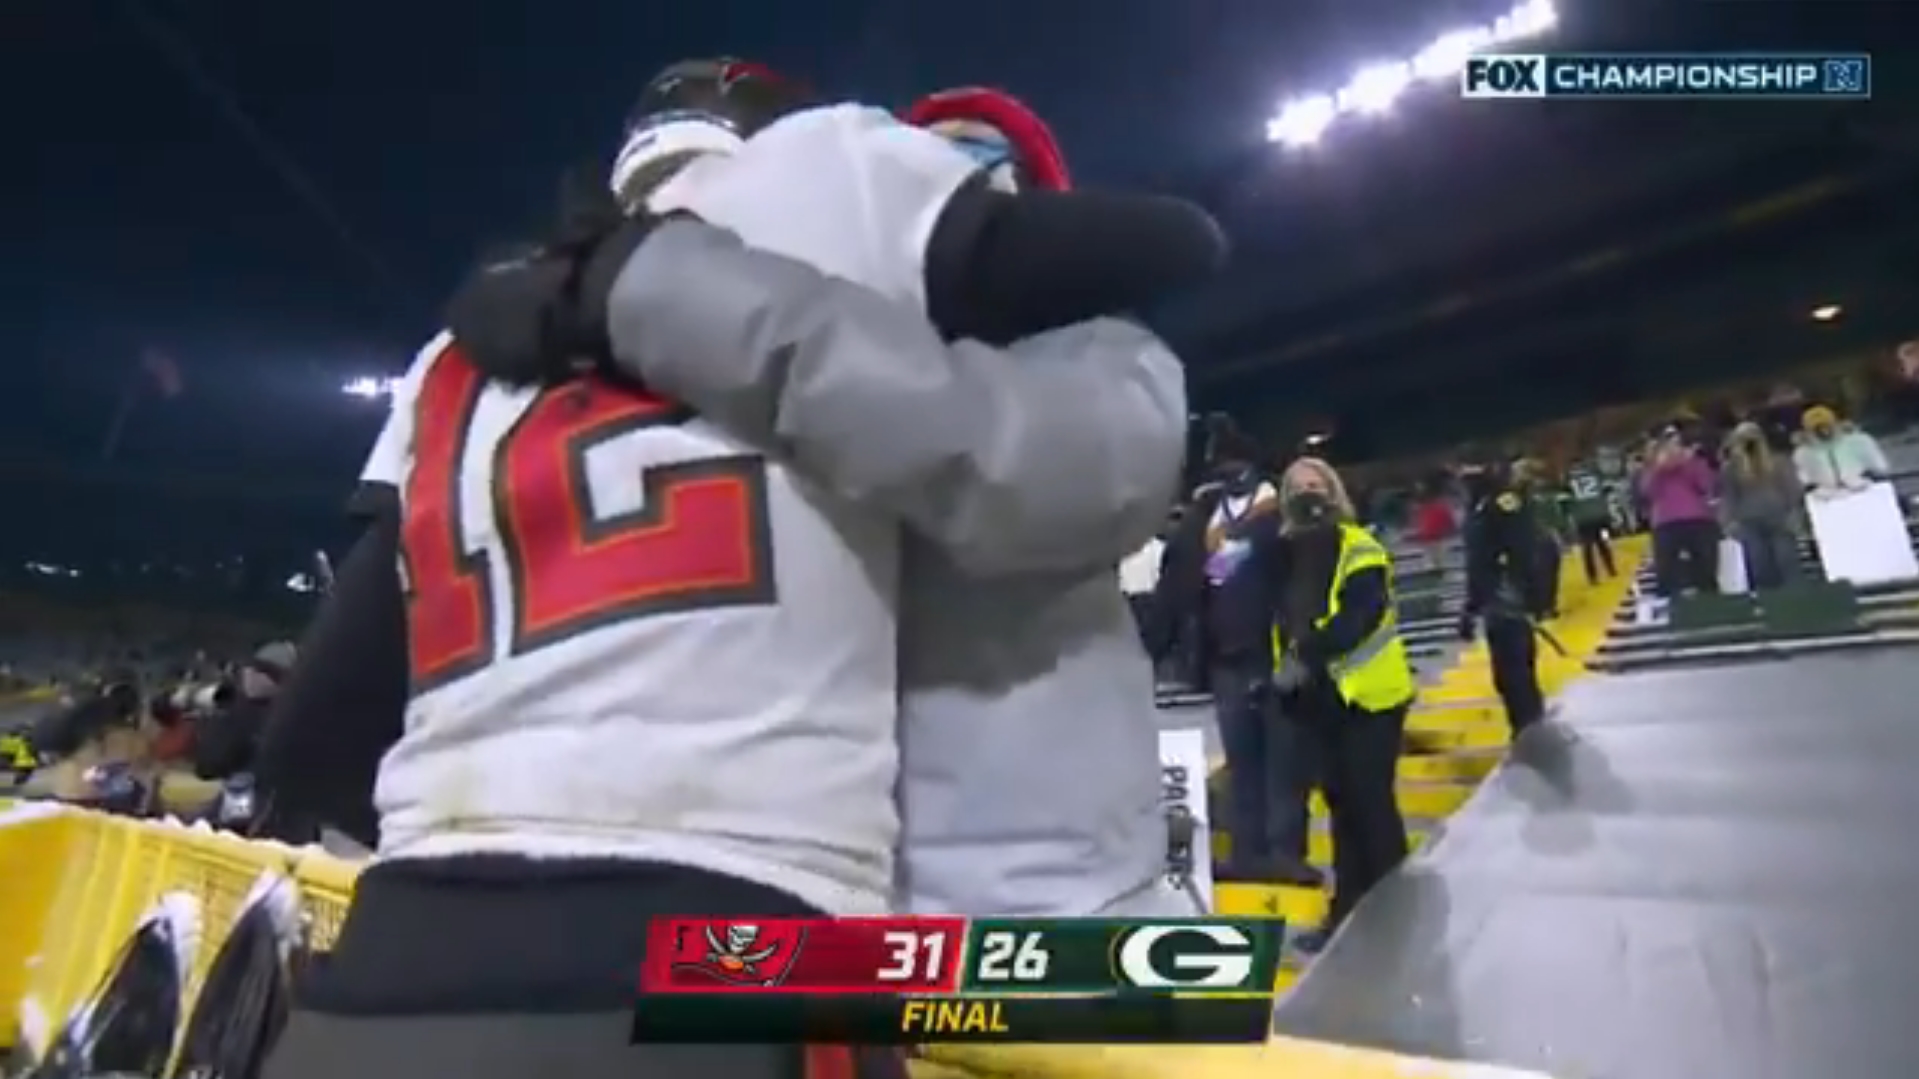 Watch: Tom Brady celebrates Buccaneers' Super Bowl berth by asking security  if he can hug his son - The Boston Globe